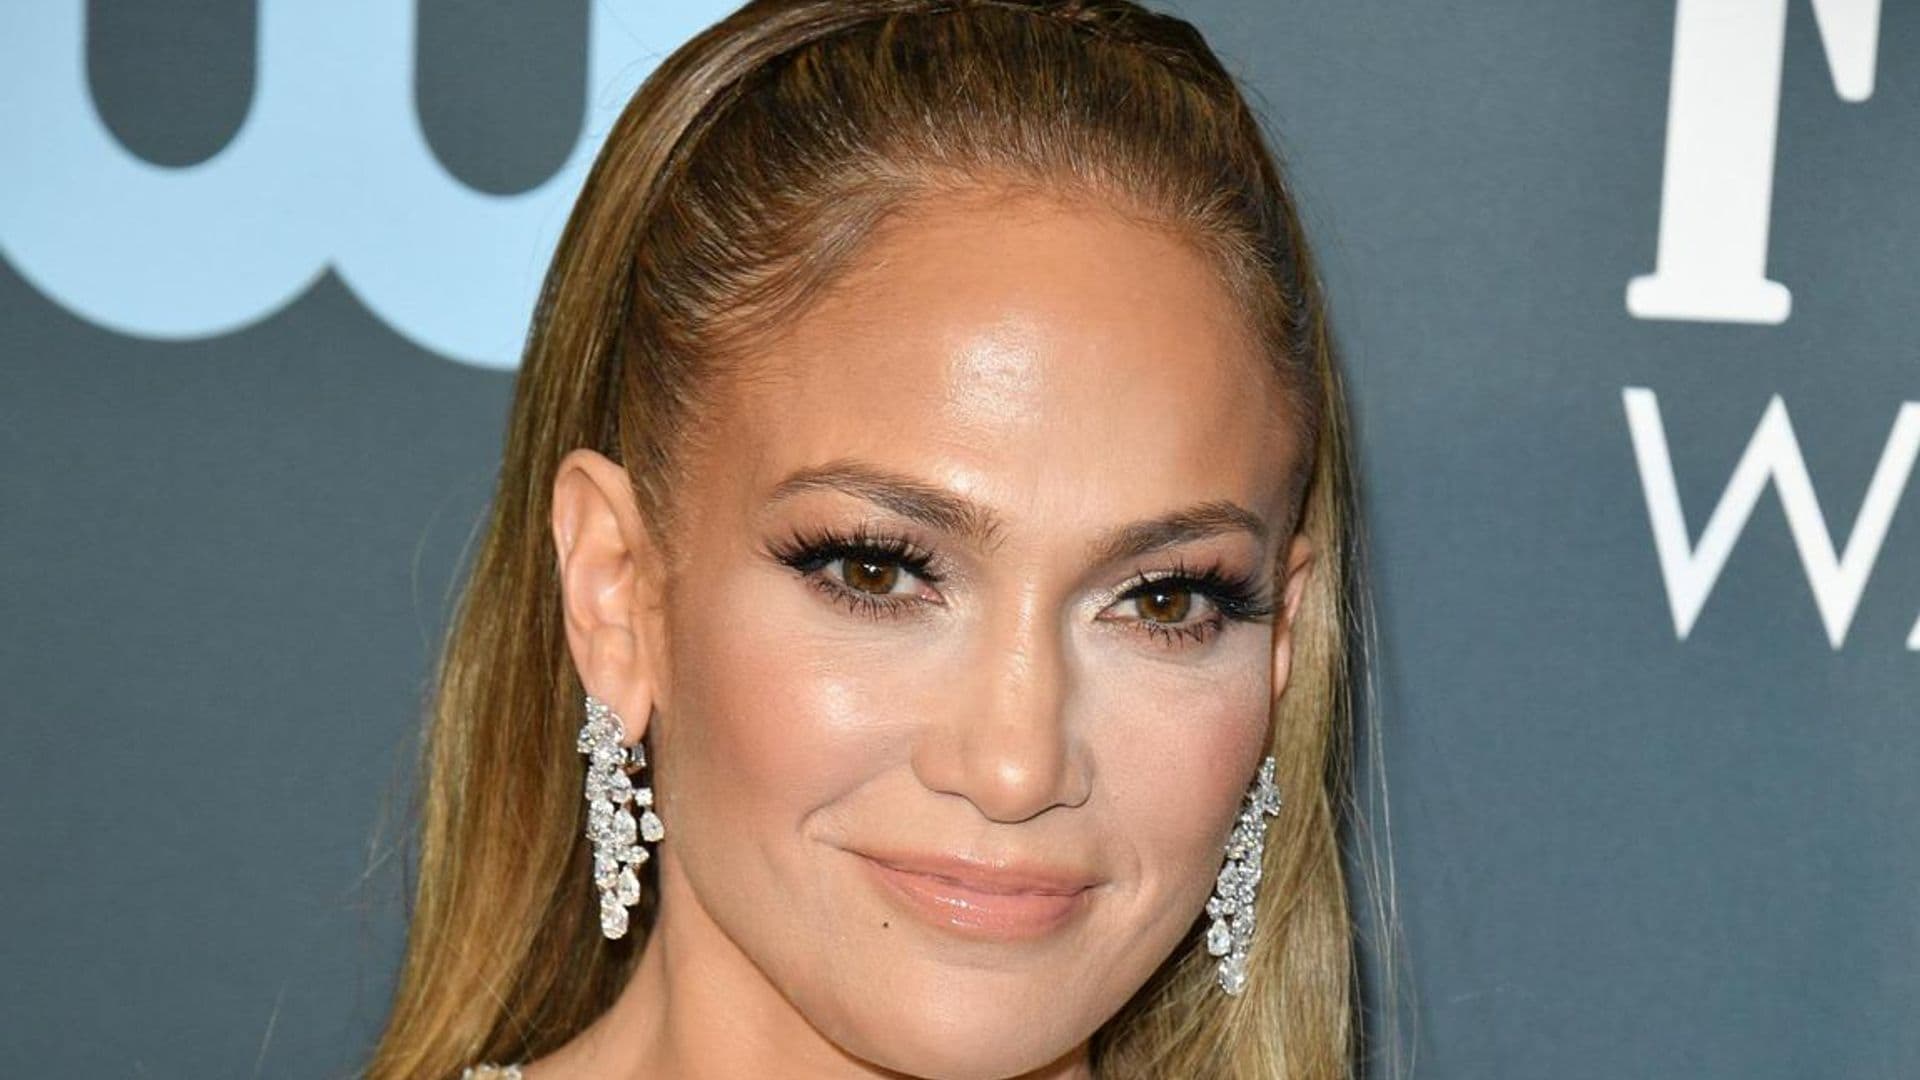 Jennifer Lopez announces first category of her highly anticipated brand JLo Beauty